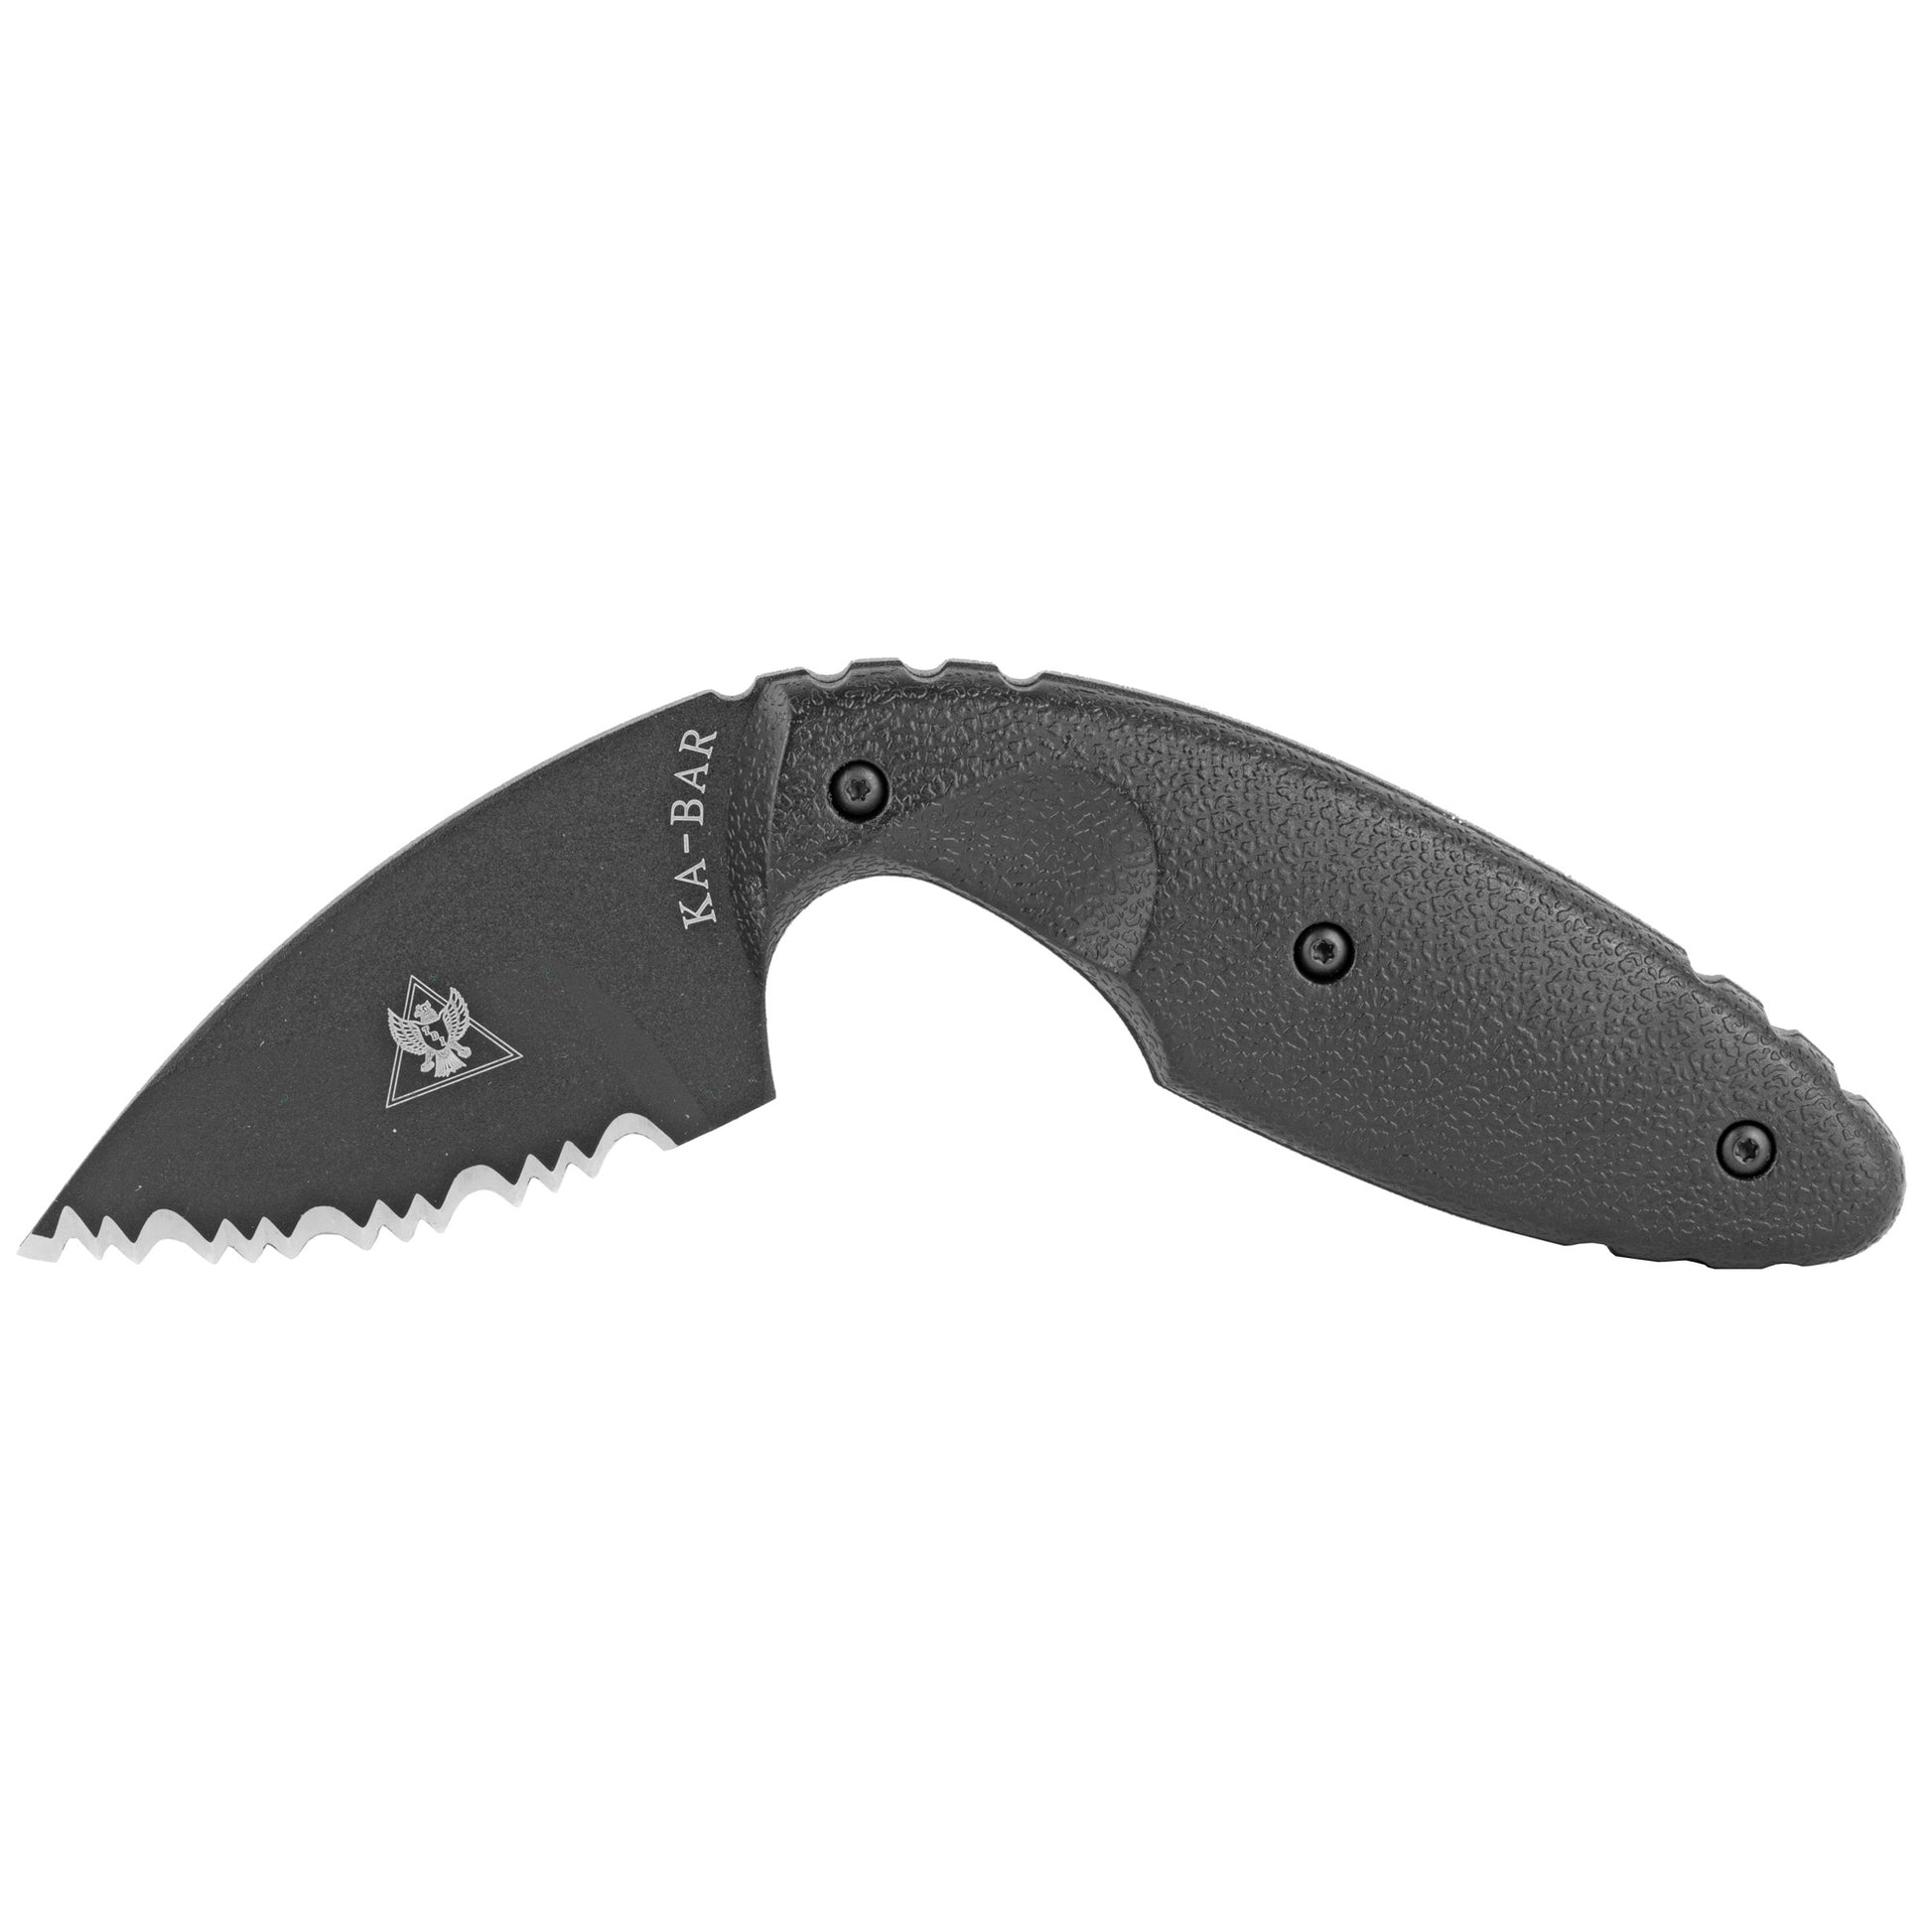 KABAR TDI Law Enforcement 2.3 Fixed Blade Knife DropPoint Serrated Edge Blk 1481 - California Shooting Supplies